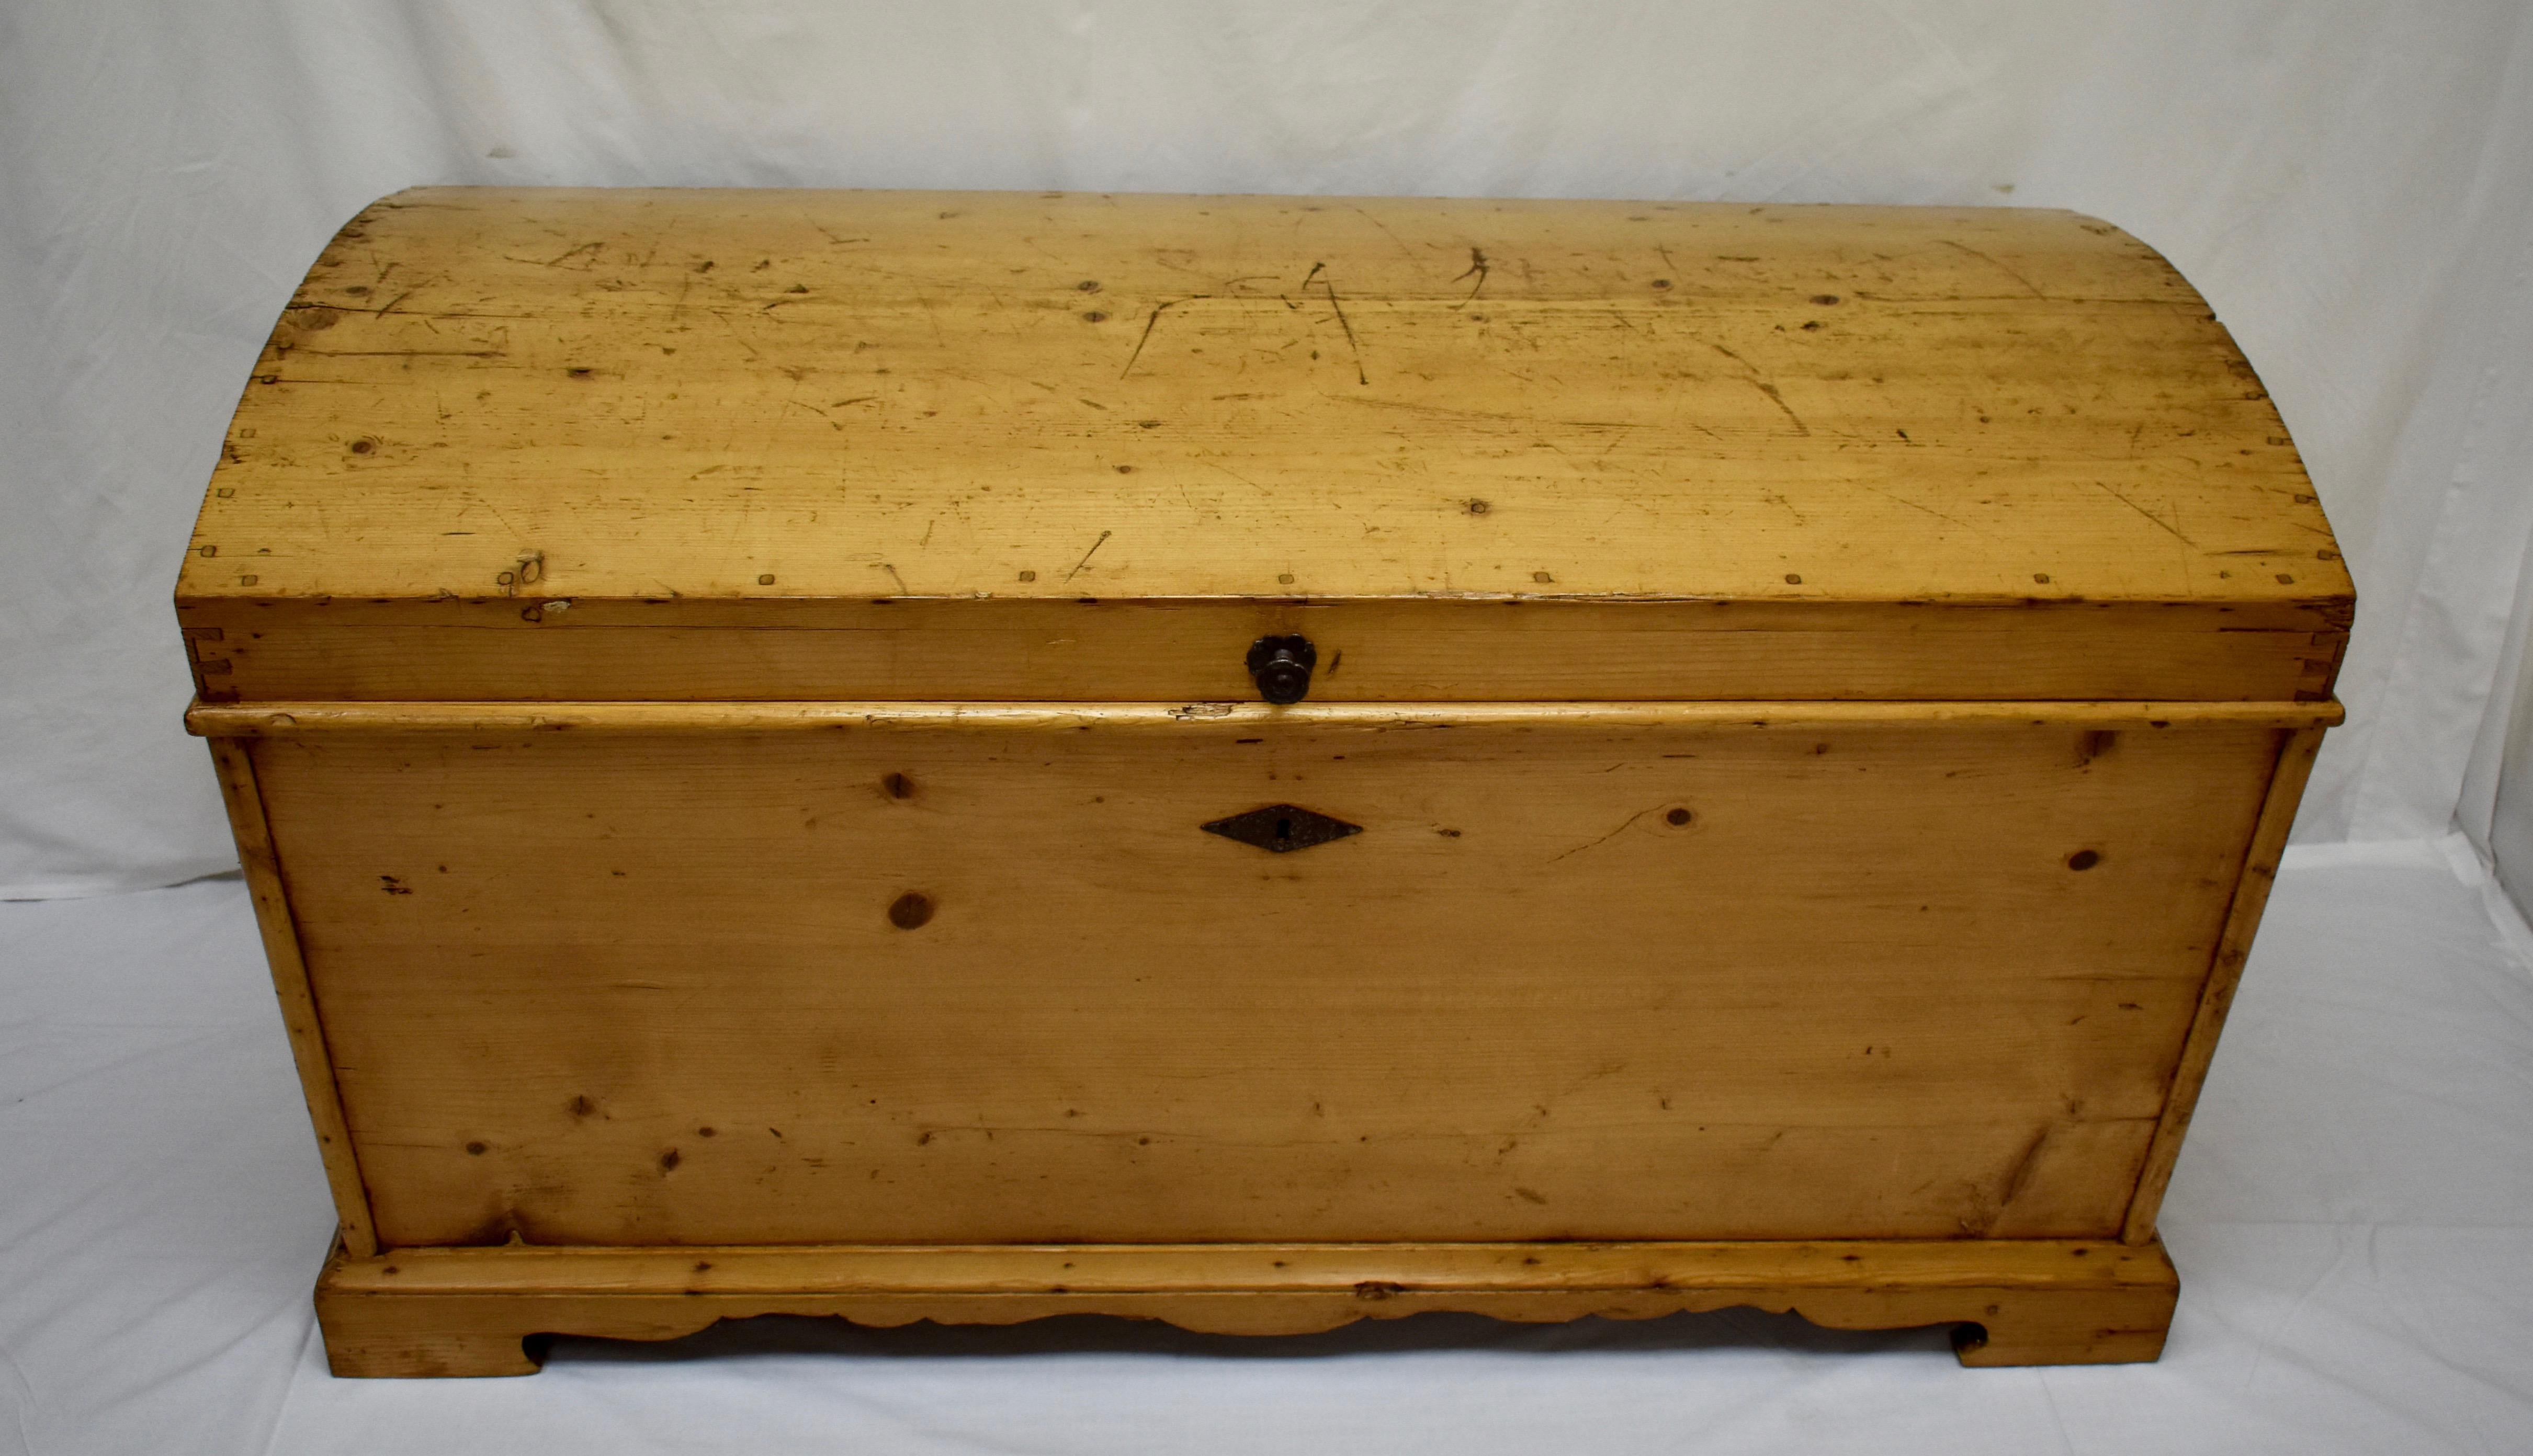 This outstanding stately pine dome-top trunk is one of the largest and nicest we have seen in a long time. It is of entirely handcut dovetailed and pegged construction. The three board top is fitted so well that it looks like a single board. The